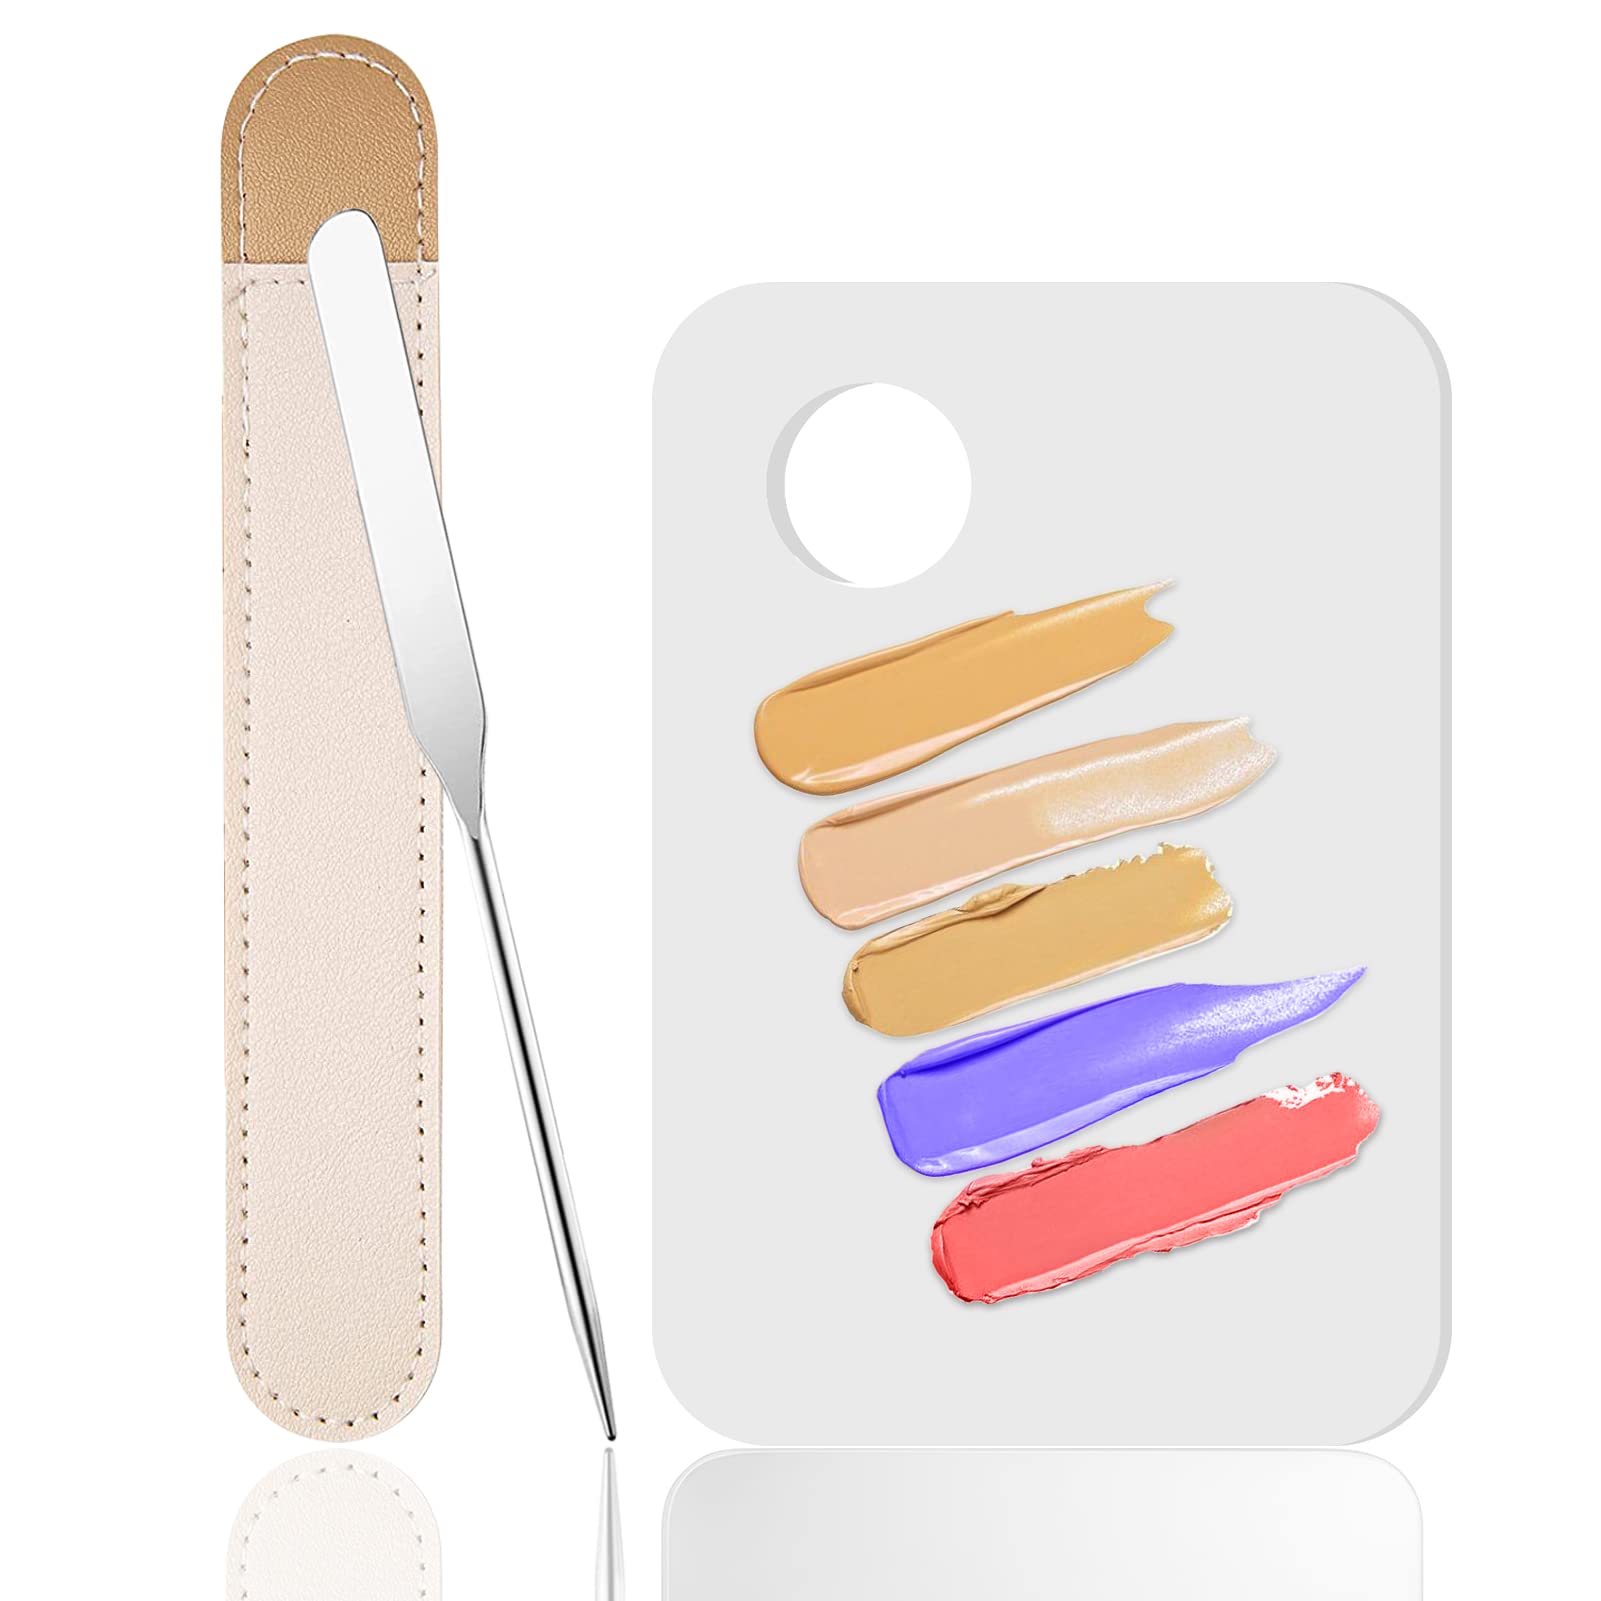 Makeup Spatula and Palette Set, Including Stainless Steel Makeup Spatula Korean for Professional, Makeup Mixing Palette for Eye Shadow/Eyelash/Nail Art/Foundation, Foundation Palette Spatula Kit